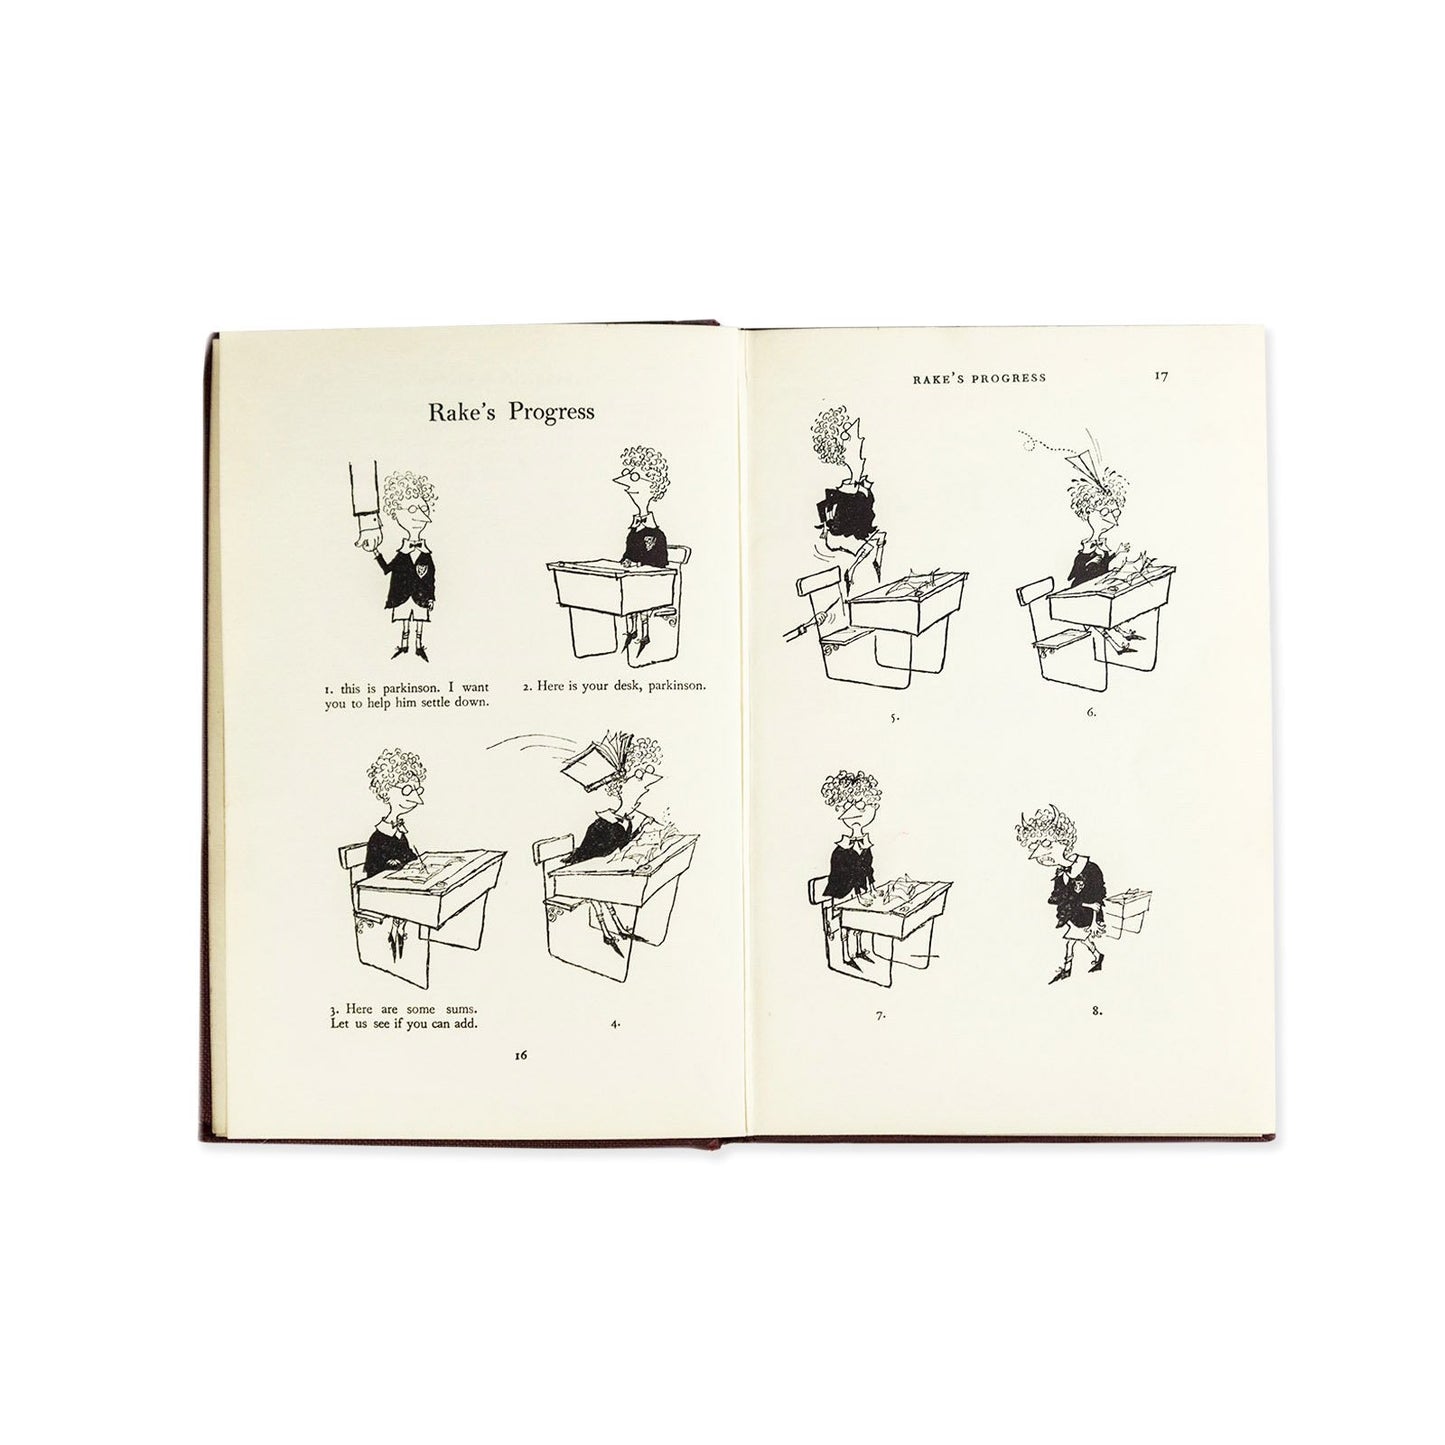 How to be Topp - The First Molesworth Book, 1954